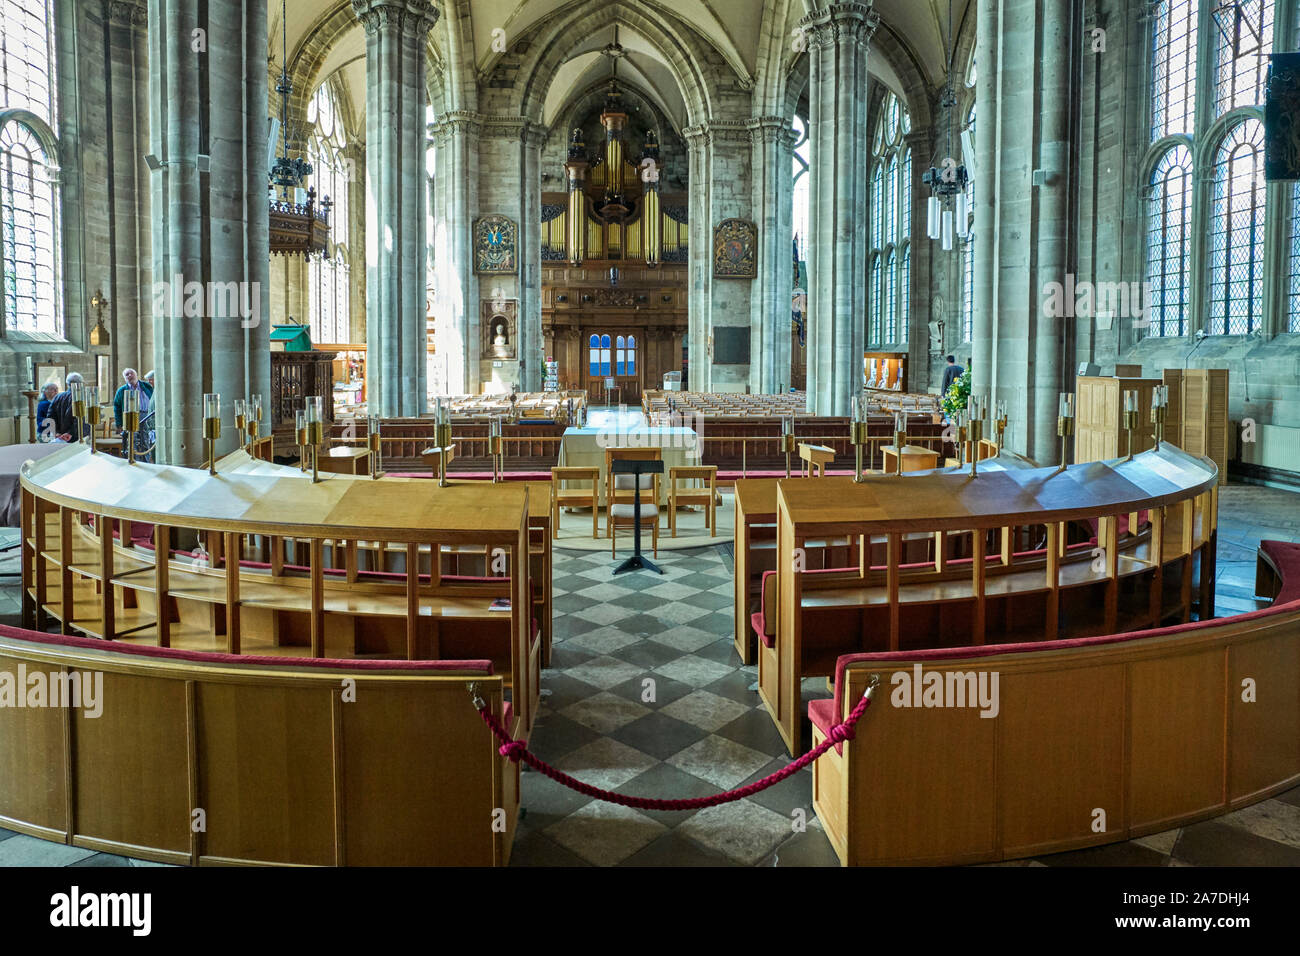 Interior of St Mary’s church in Warwick Stock Photo